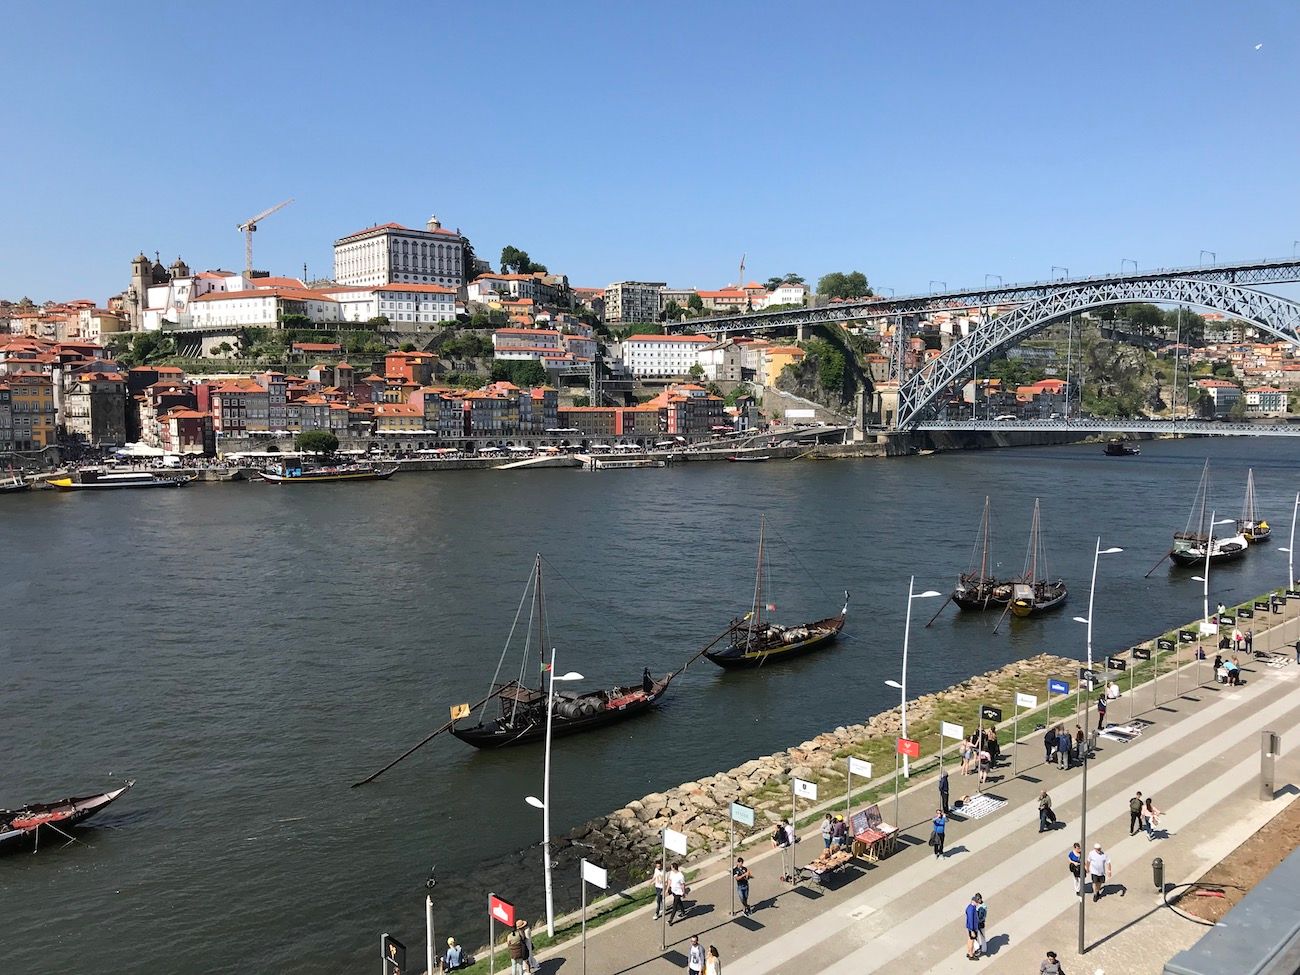 Travel - On the road in the Douro - Part 1